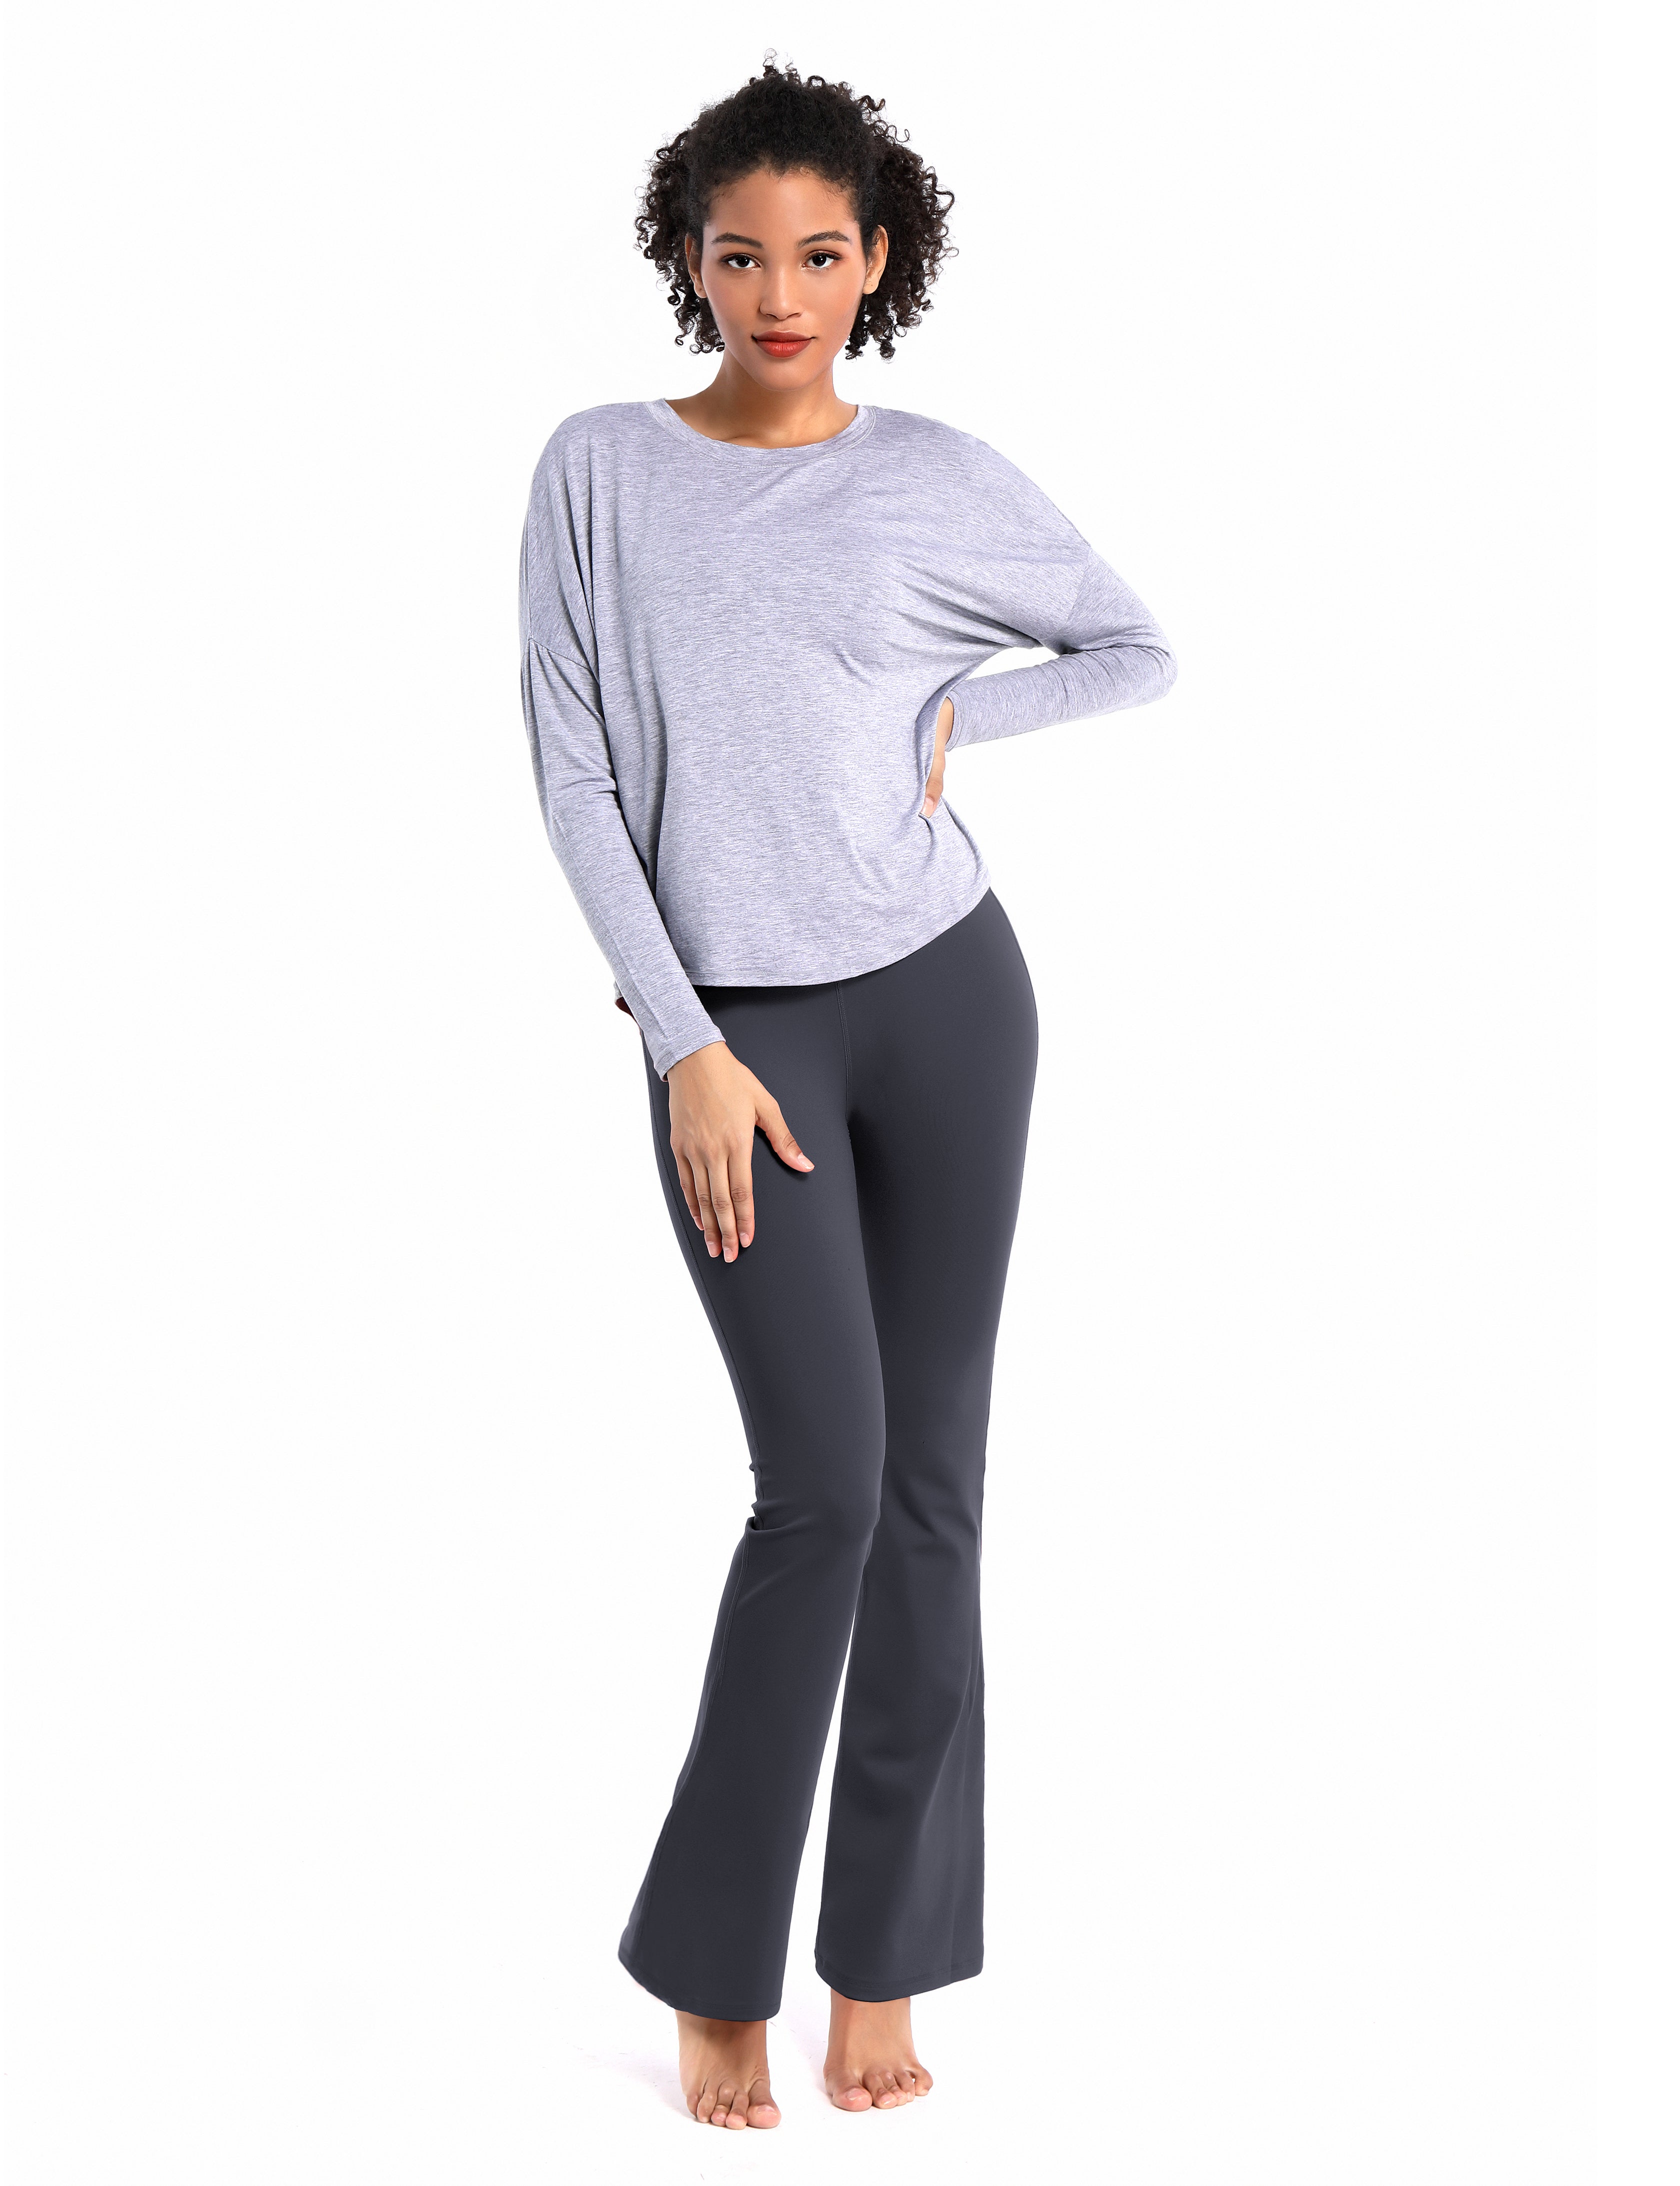 Cotton Nylon Bootcut Leggings shadowcharcoal 87%Nylon/13%Spandex (Super soft, cotton feel , 280gsm) Fabric doesn't attract lint easily 4-way stretch No see-through Moisture-wicking Inner pocket Four lengths